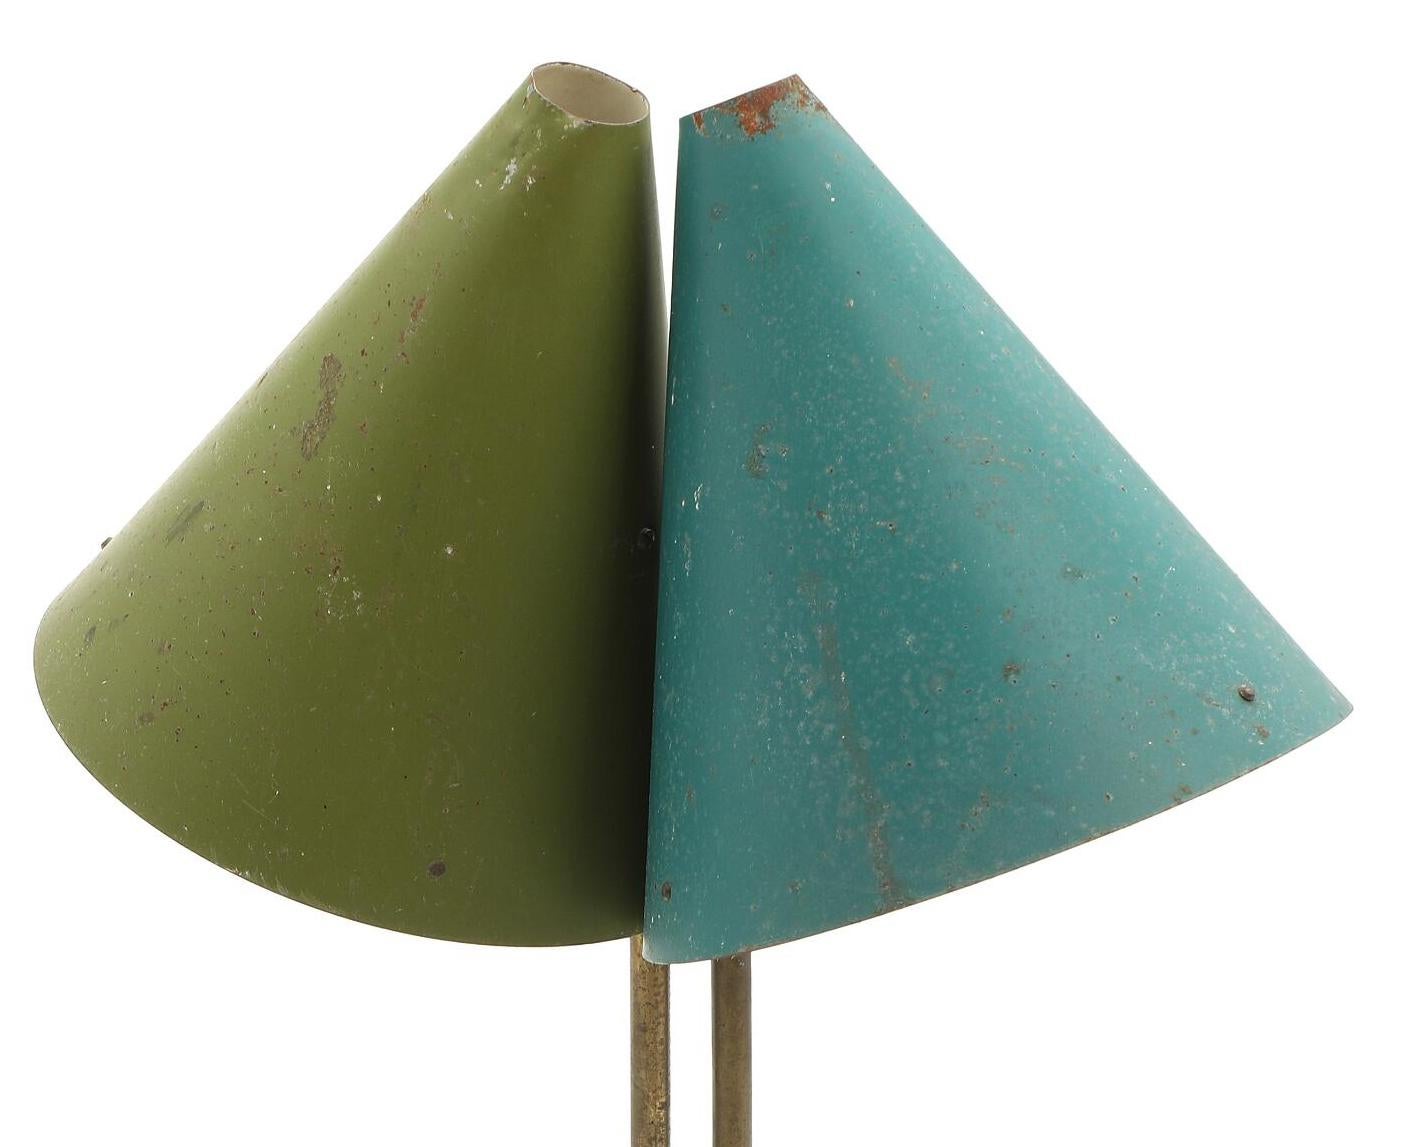 1959 Bent Karlby 'Mosaik' Adjustable Brass & Lacquered Metal Table Lamp for Lyfa 1